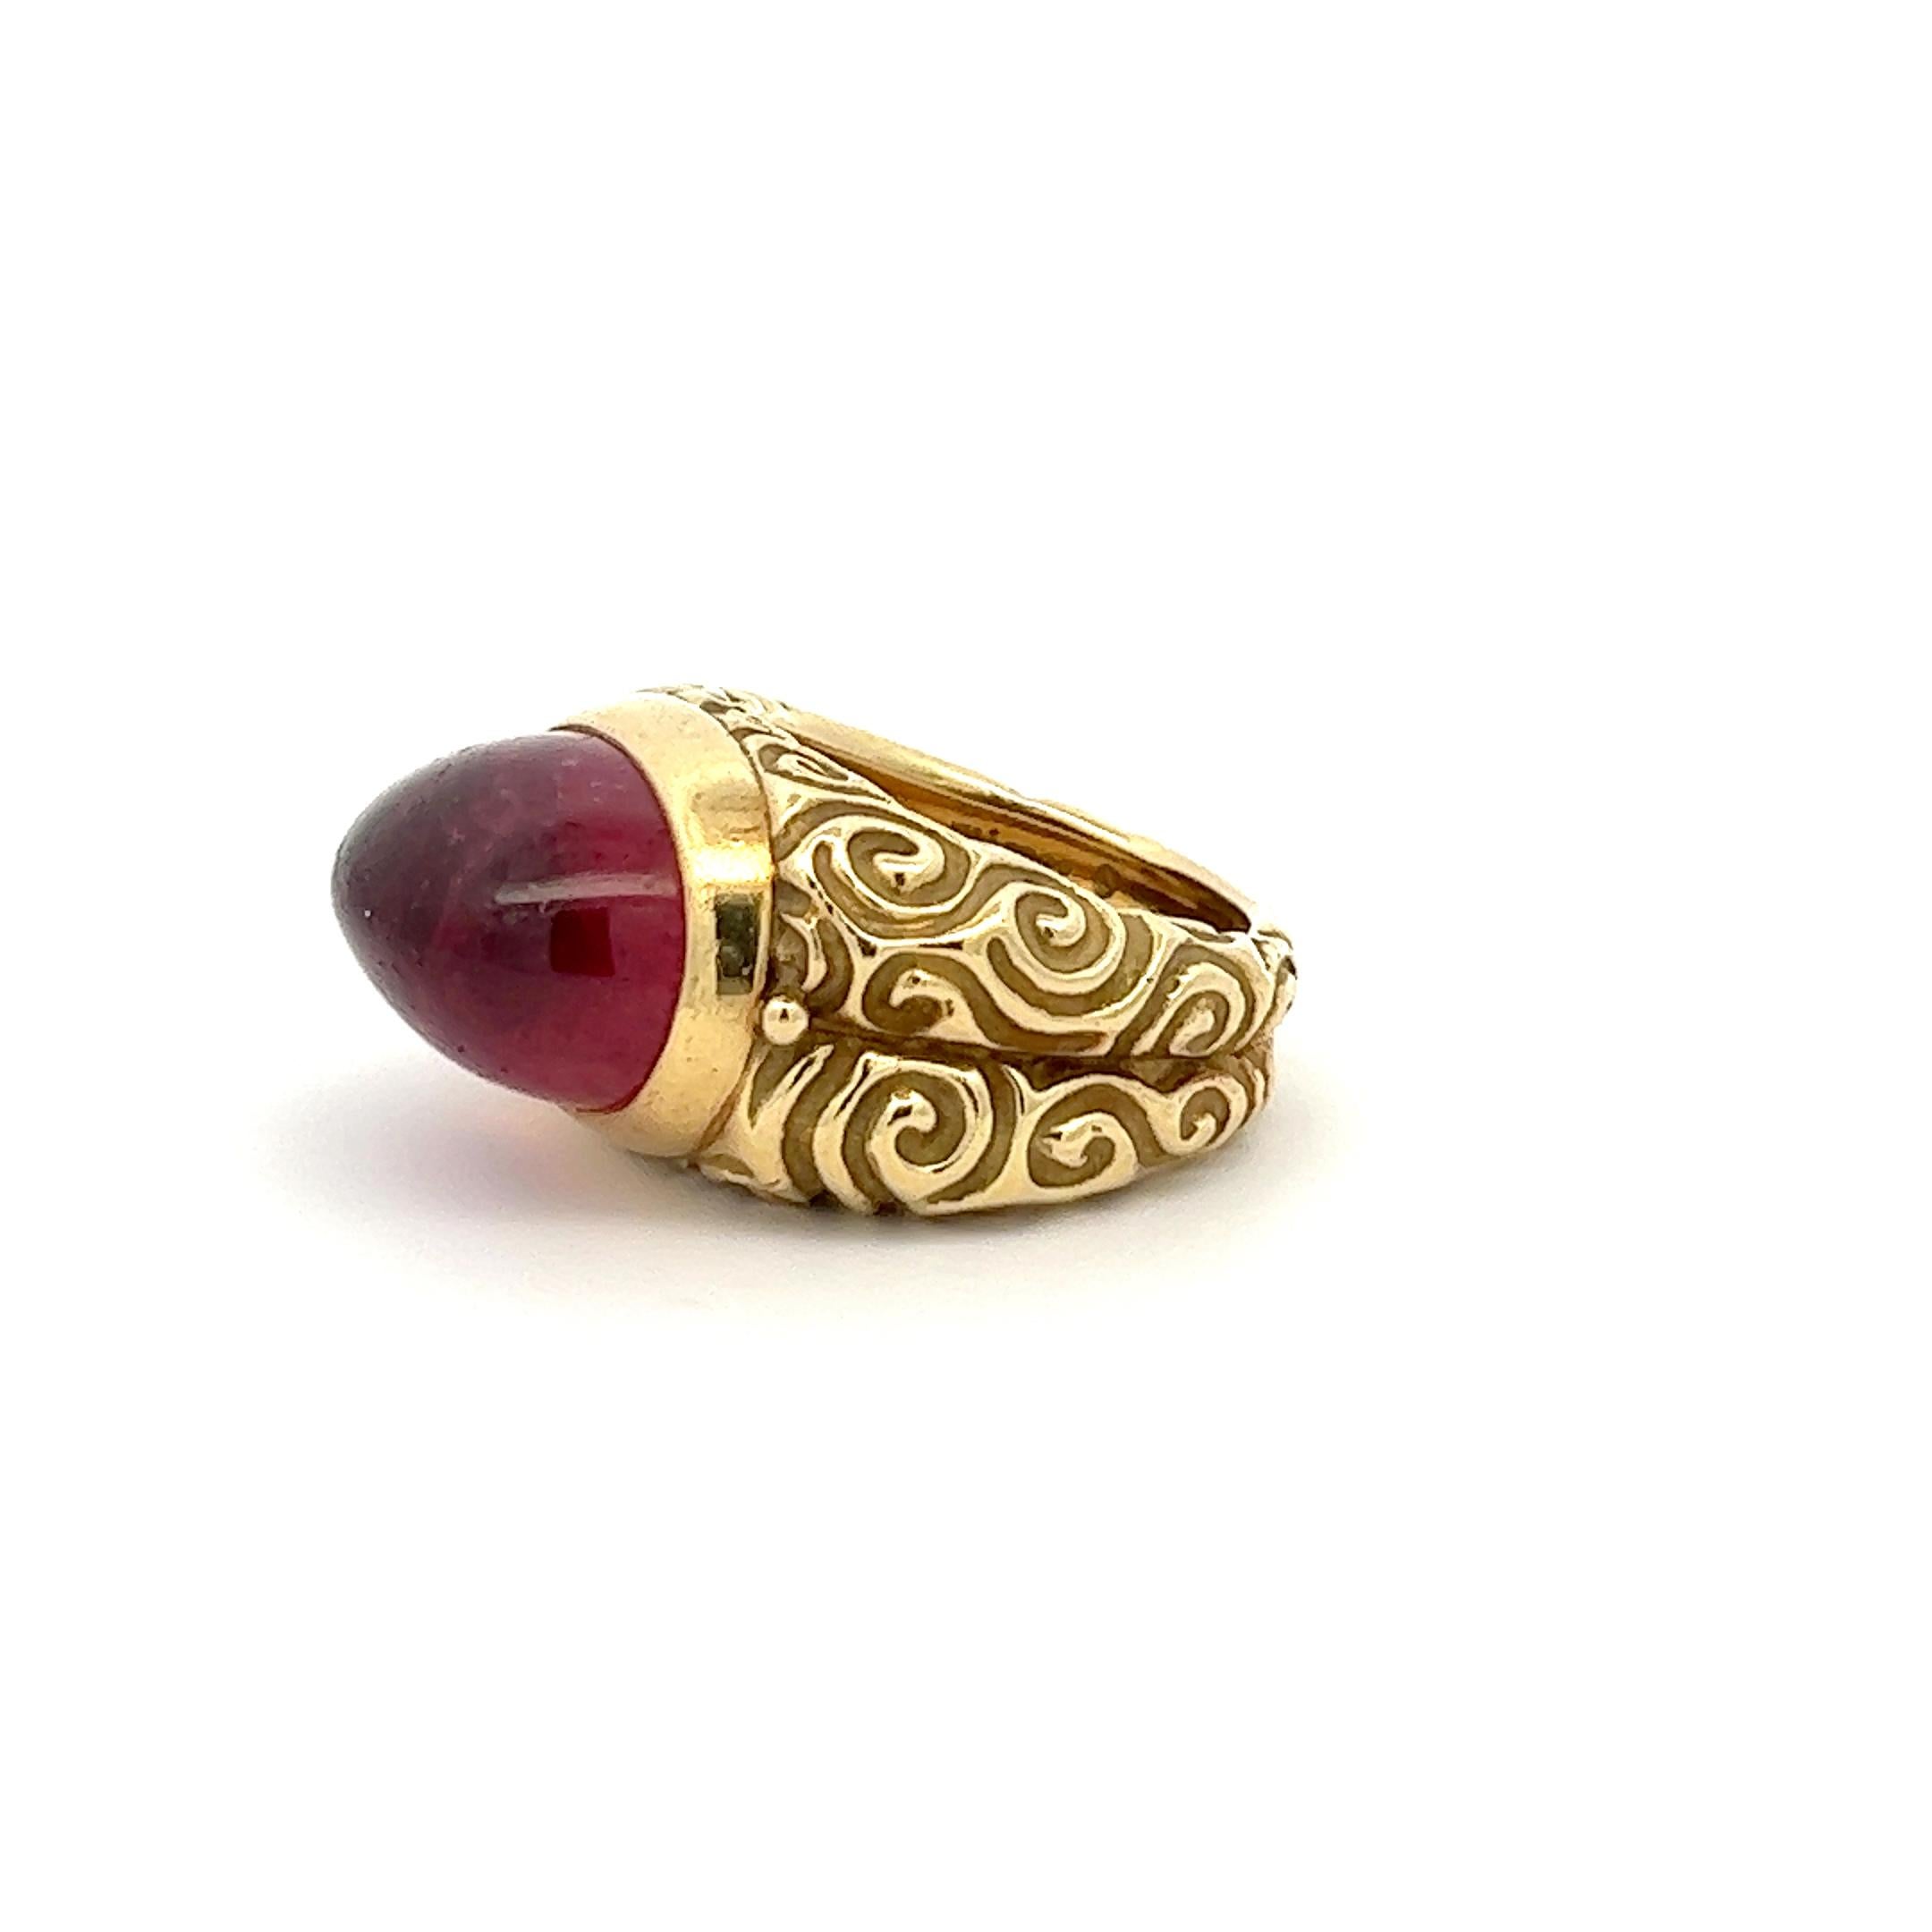 An 18k yellow gold and pink Tourmaline ring by Elizabeth Gage.

Origin: London, UK.
Ahe: 2018.
Ring size: 59.
Weight: circa 30.4 grams.
Marked with the UK hallmark for 18k gold and for London 2018. Also marked with the UK makers mark for Elizabeth